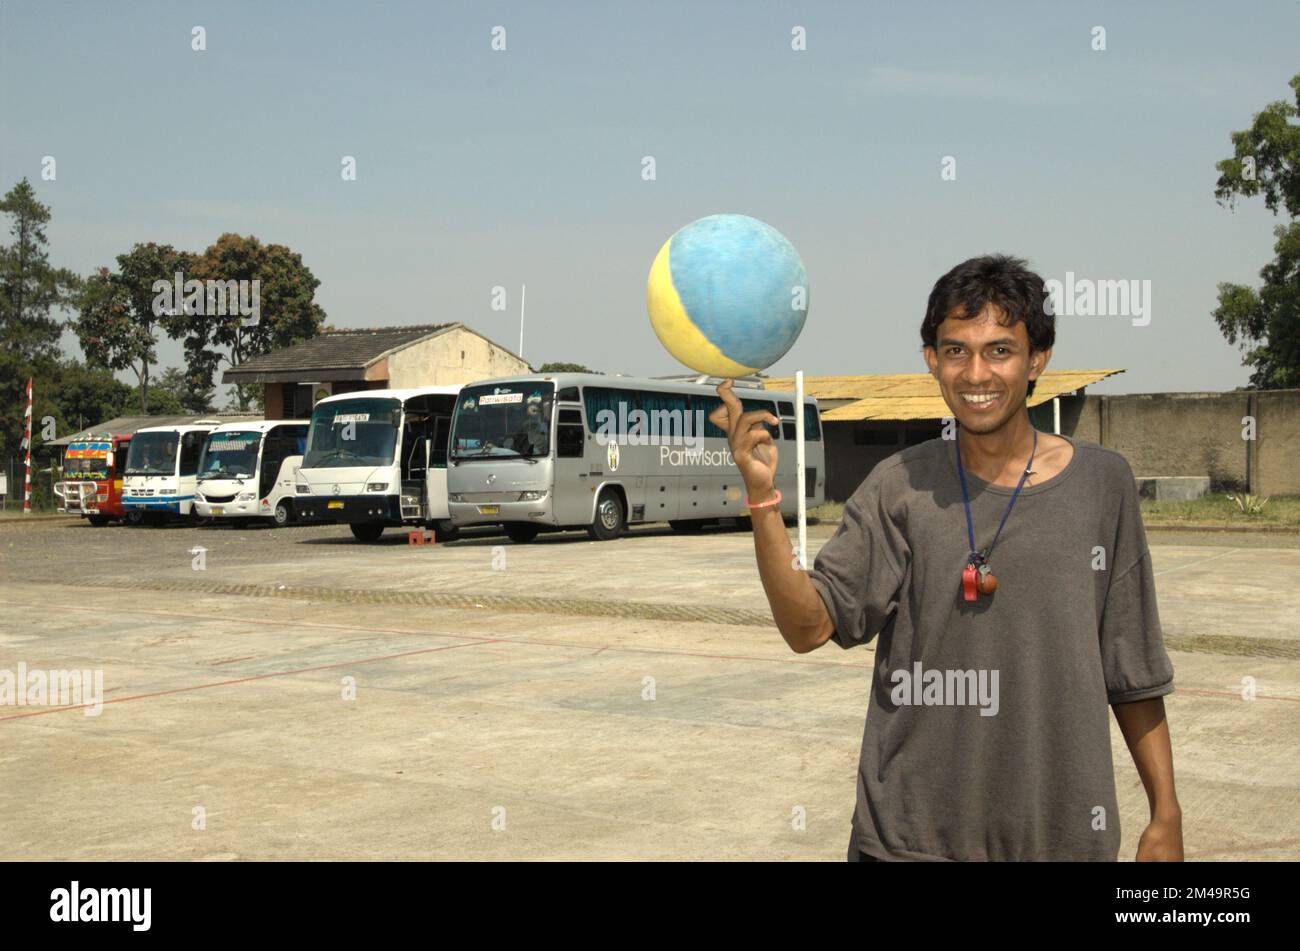 A young coach playing basketball at a basketball field that occasionally also functioned as a parking ground for buses carrying religious tourists who want to visit Daarut Tauhiid area in Gegerkalong, Bandung, West Java, Indonesia. Stock Photo